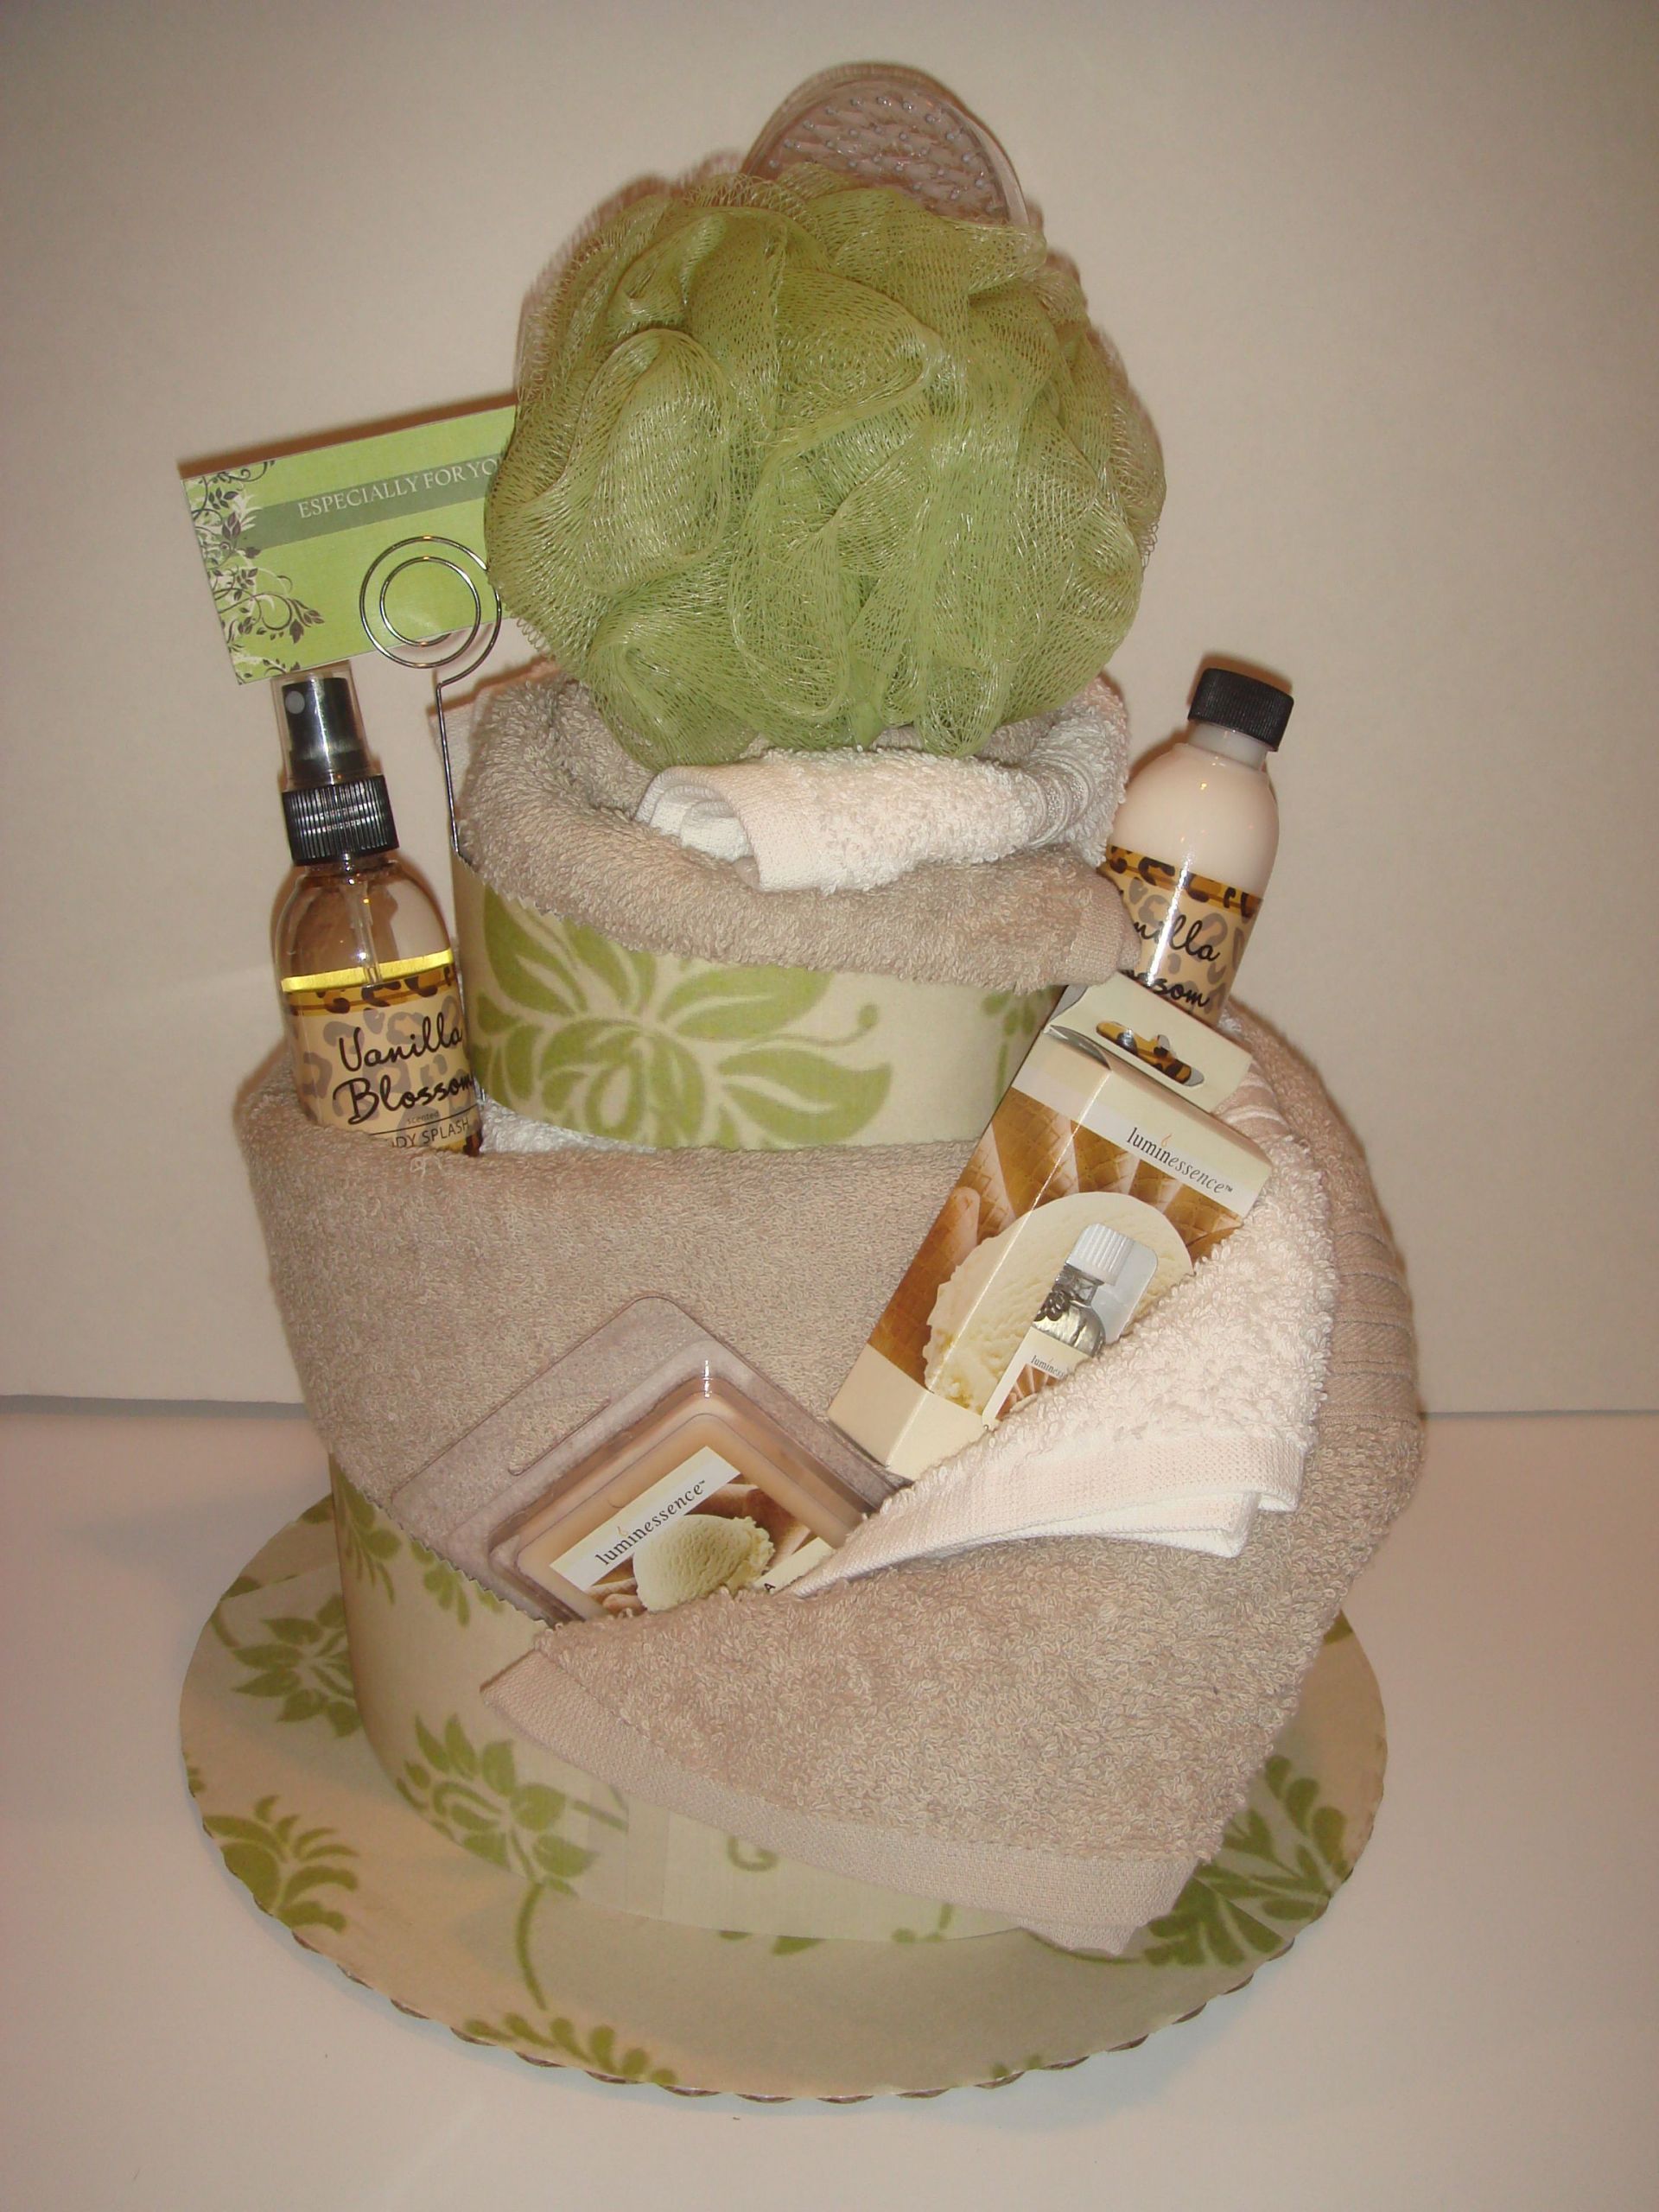 Towel Gift Basket Ideas
 This is a great idea for a Pure Romance t basket